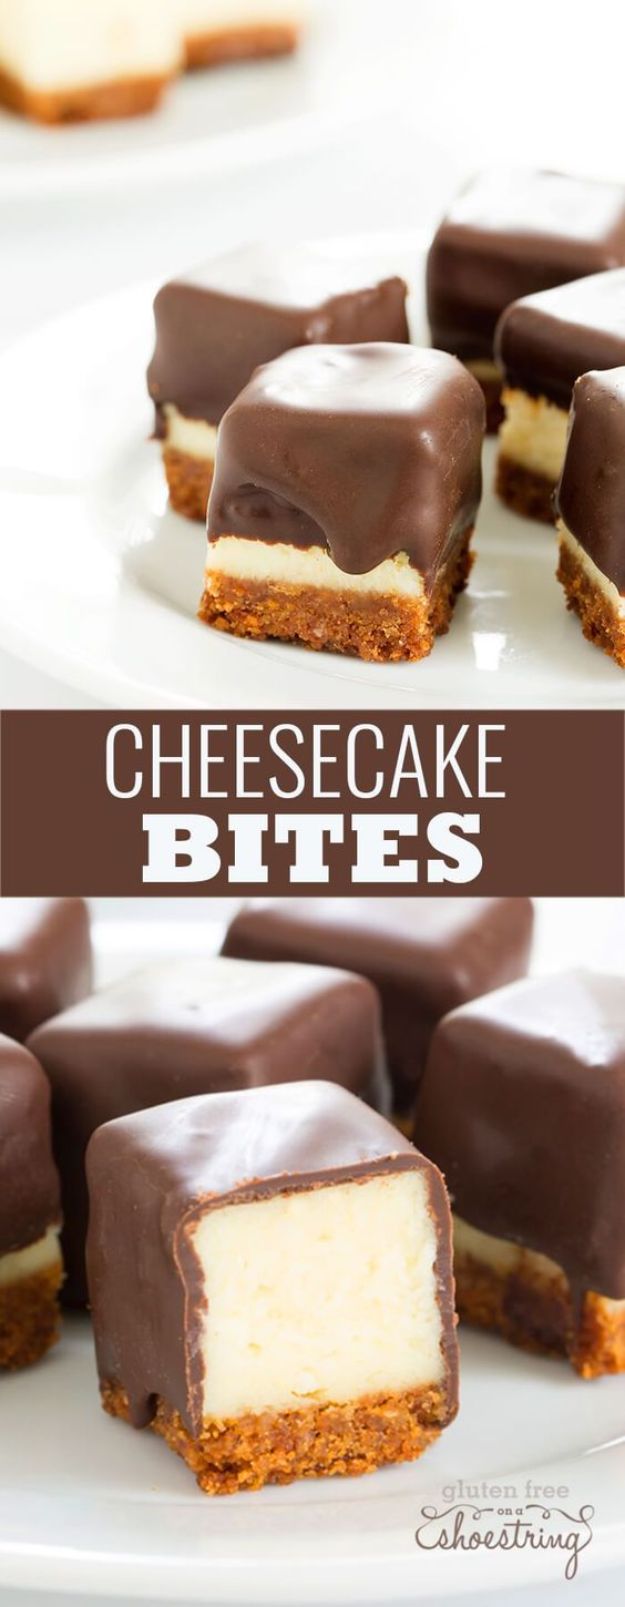 Gluten Free Desserts - Cheesecake Bites - Easy Recipes and Healthy Recipe Ideas for Cookies, Cake, Pie, Cupcakes, Cheesecake and Ice Cream - Best No Sugar Glutenfree Chocolate, No Bake Dessert, Fruit, Peach, Apple and Banana Dishes - Flourless Christmas, Thanksgiving and Holiday Dishes #glutenfree #desserts #recipes